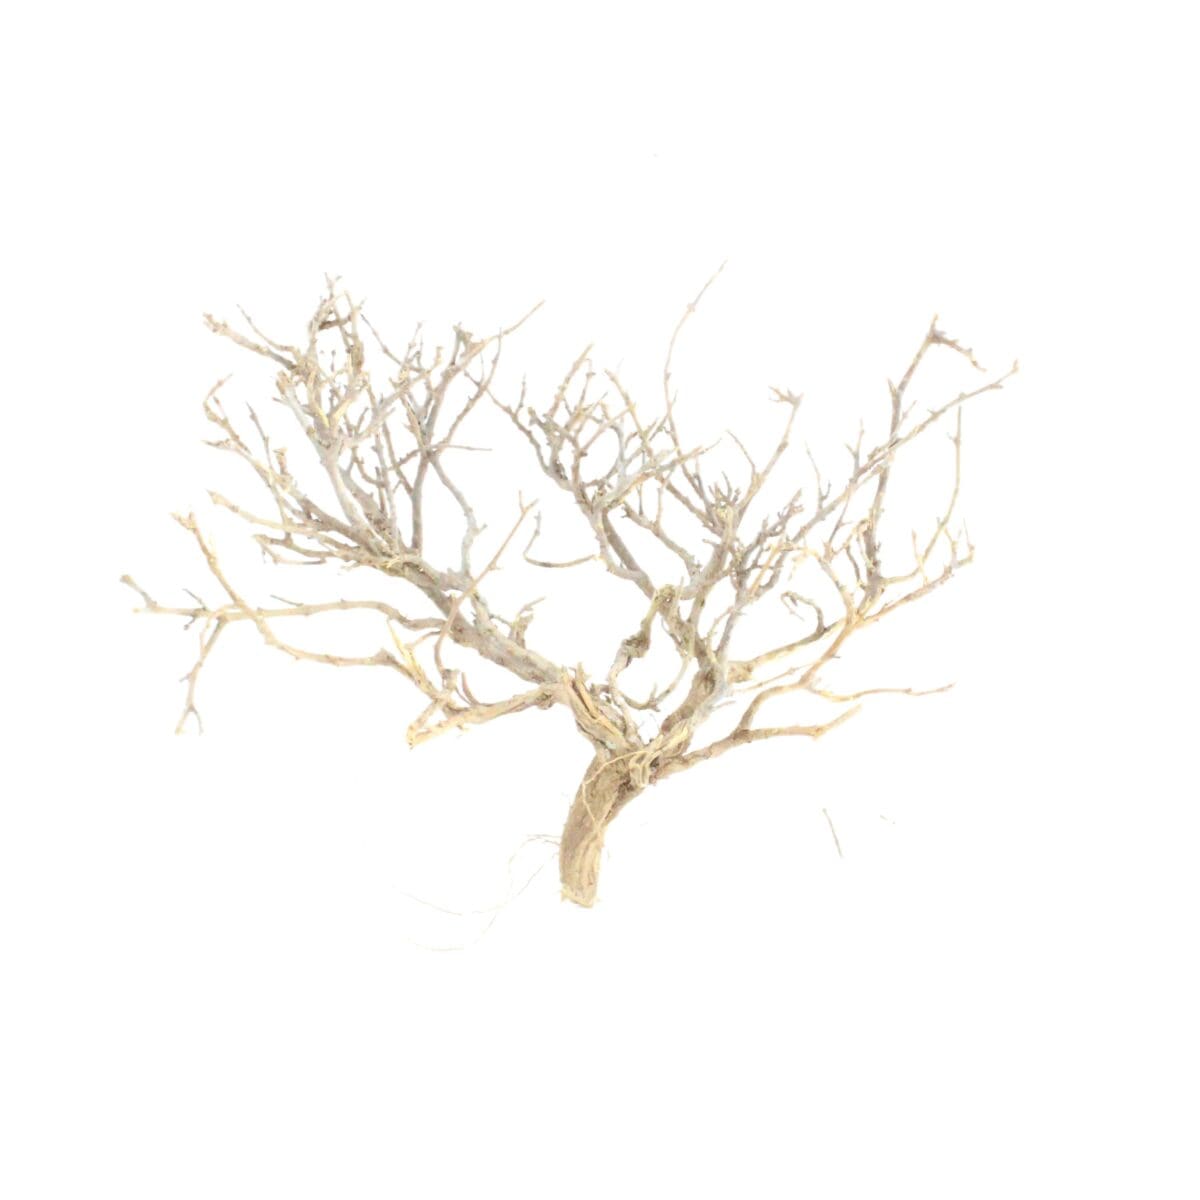 Natural Dried Twigs Branch Root